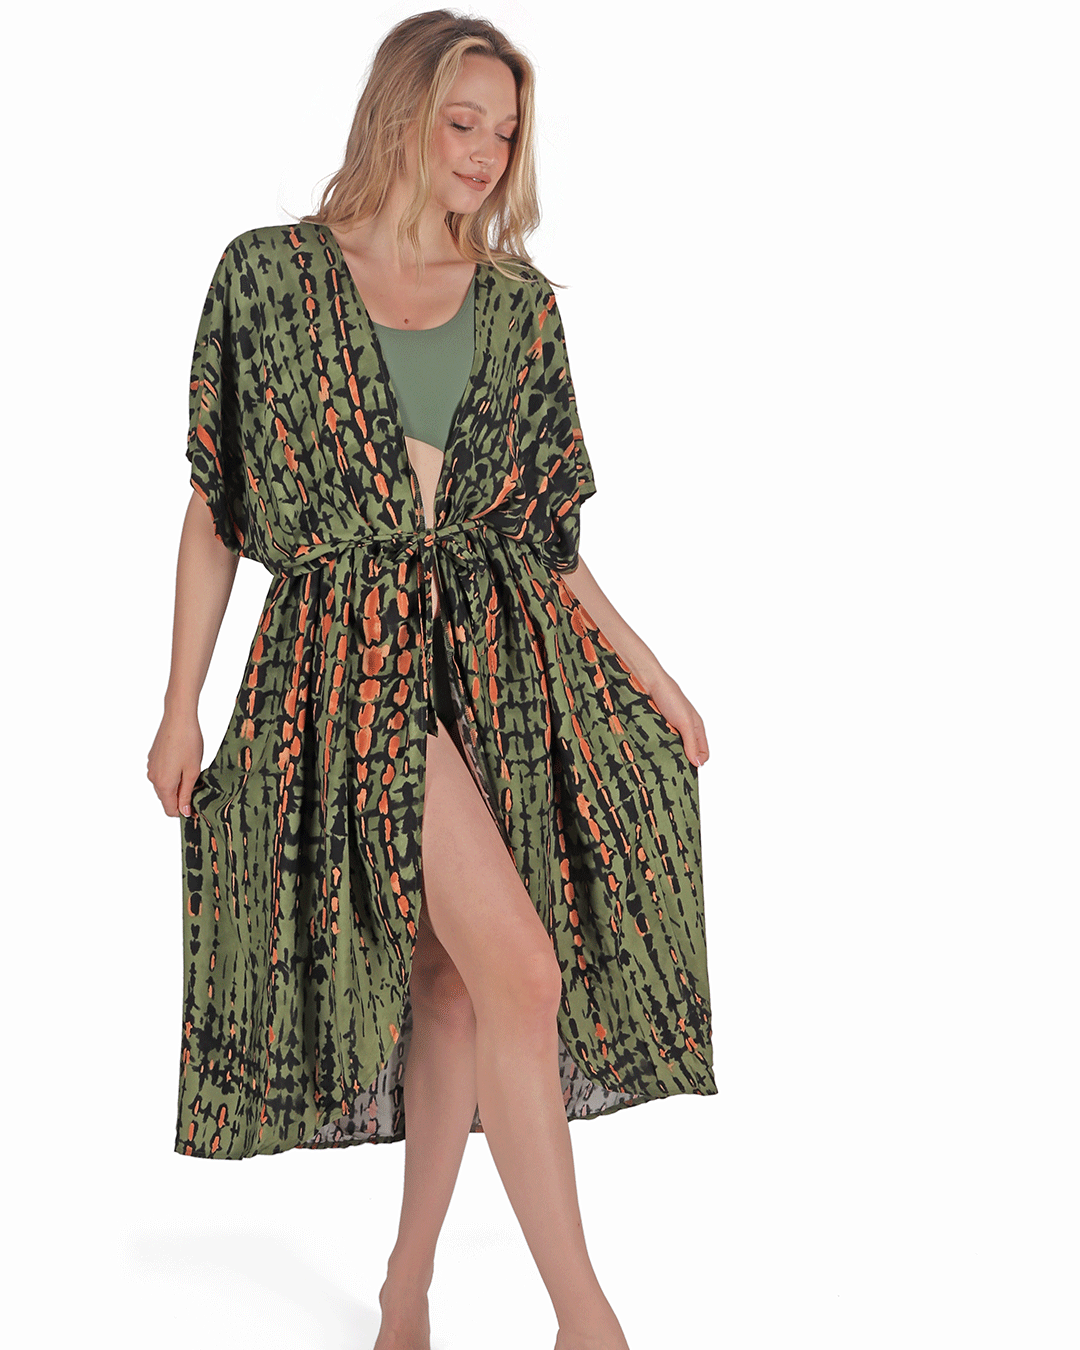 Swimwear Summer Striped Cover-Up Self Belted Free Size -  Green